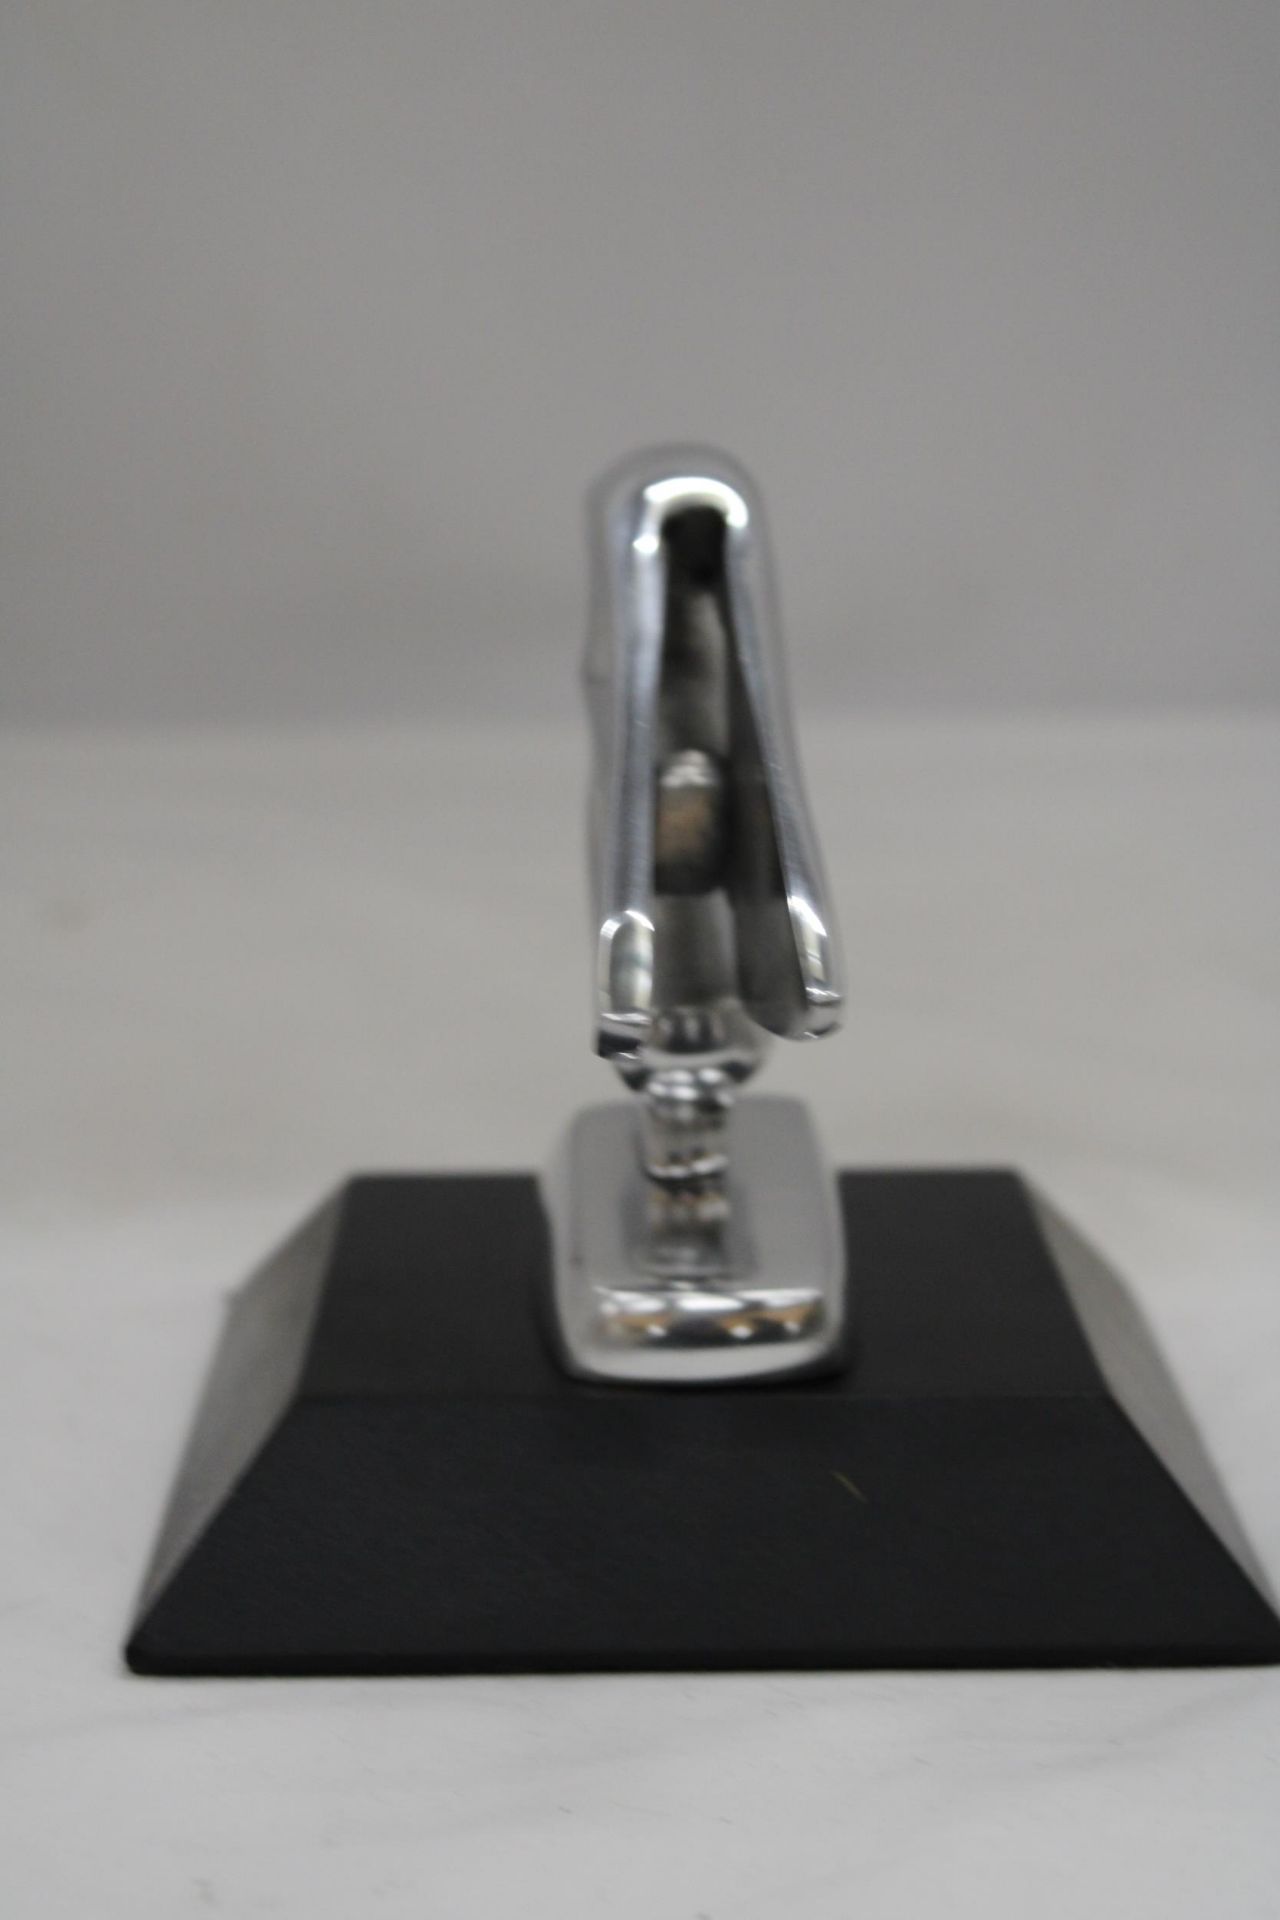 A 2019, CHROME BENTLEY 'B' ON A BASE, HEIGHT APPROX 13CM - Image 3 of 5